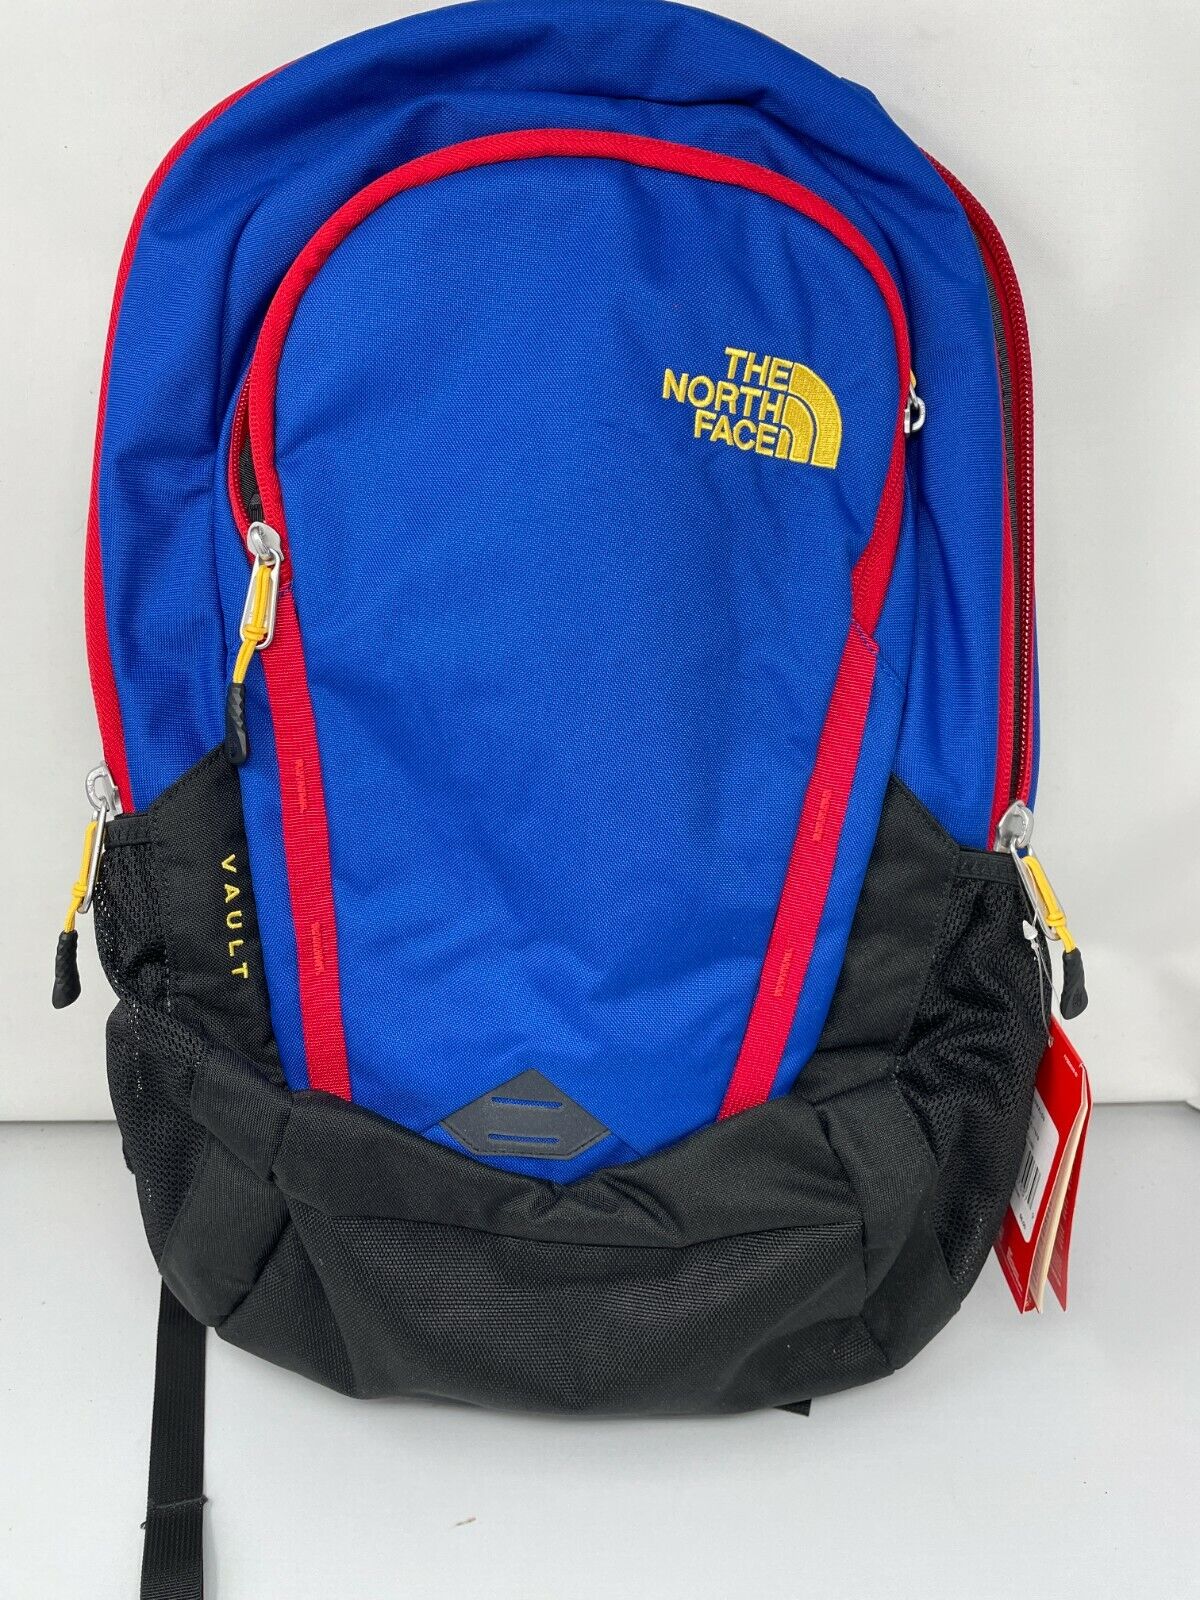 TNF The North Face Vault Backpack 28L Holds 15" Laptop Blue Red New with Tags